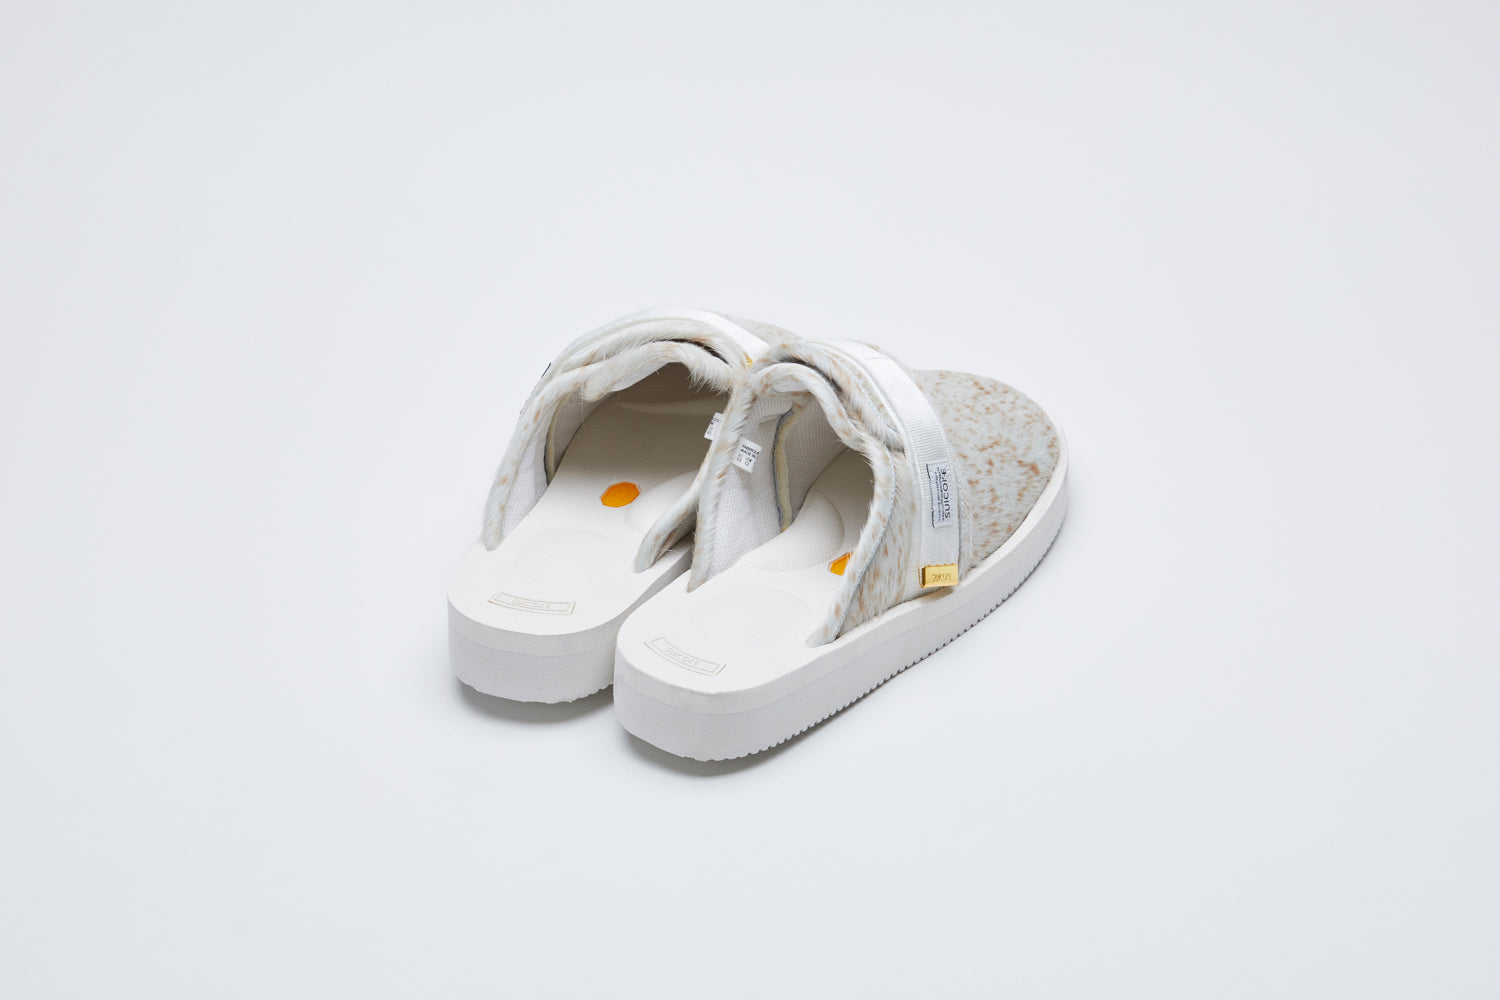 SUICOKE ZAVO-Vhl closed toe slides with white-brown speckled colored calf hair upper, white midsole and sole, nylon straps with logo patch and gold logoed tabs.  From Fall/Winter 2021 collection on SUICOKE Official US & Canada Webstore.